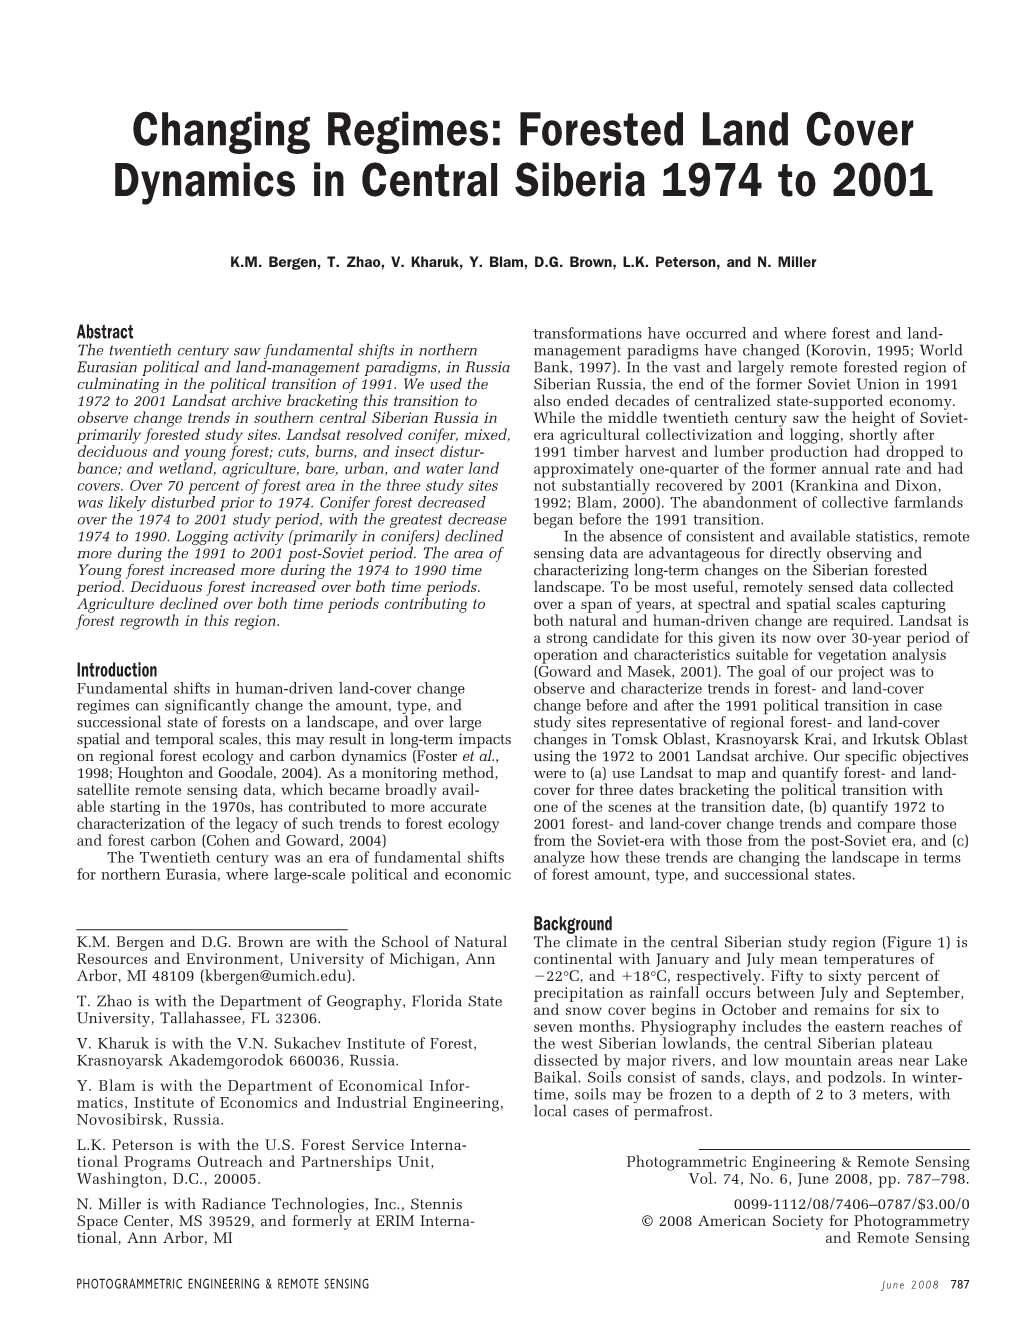 Changing Regimes: Forested Land Cover Dynamics in Central Siberia 1974 to 2001